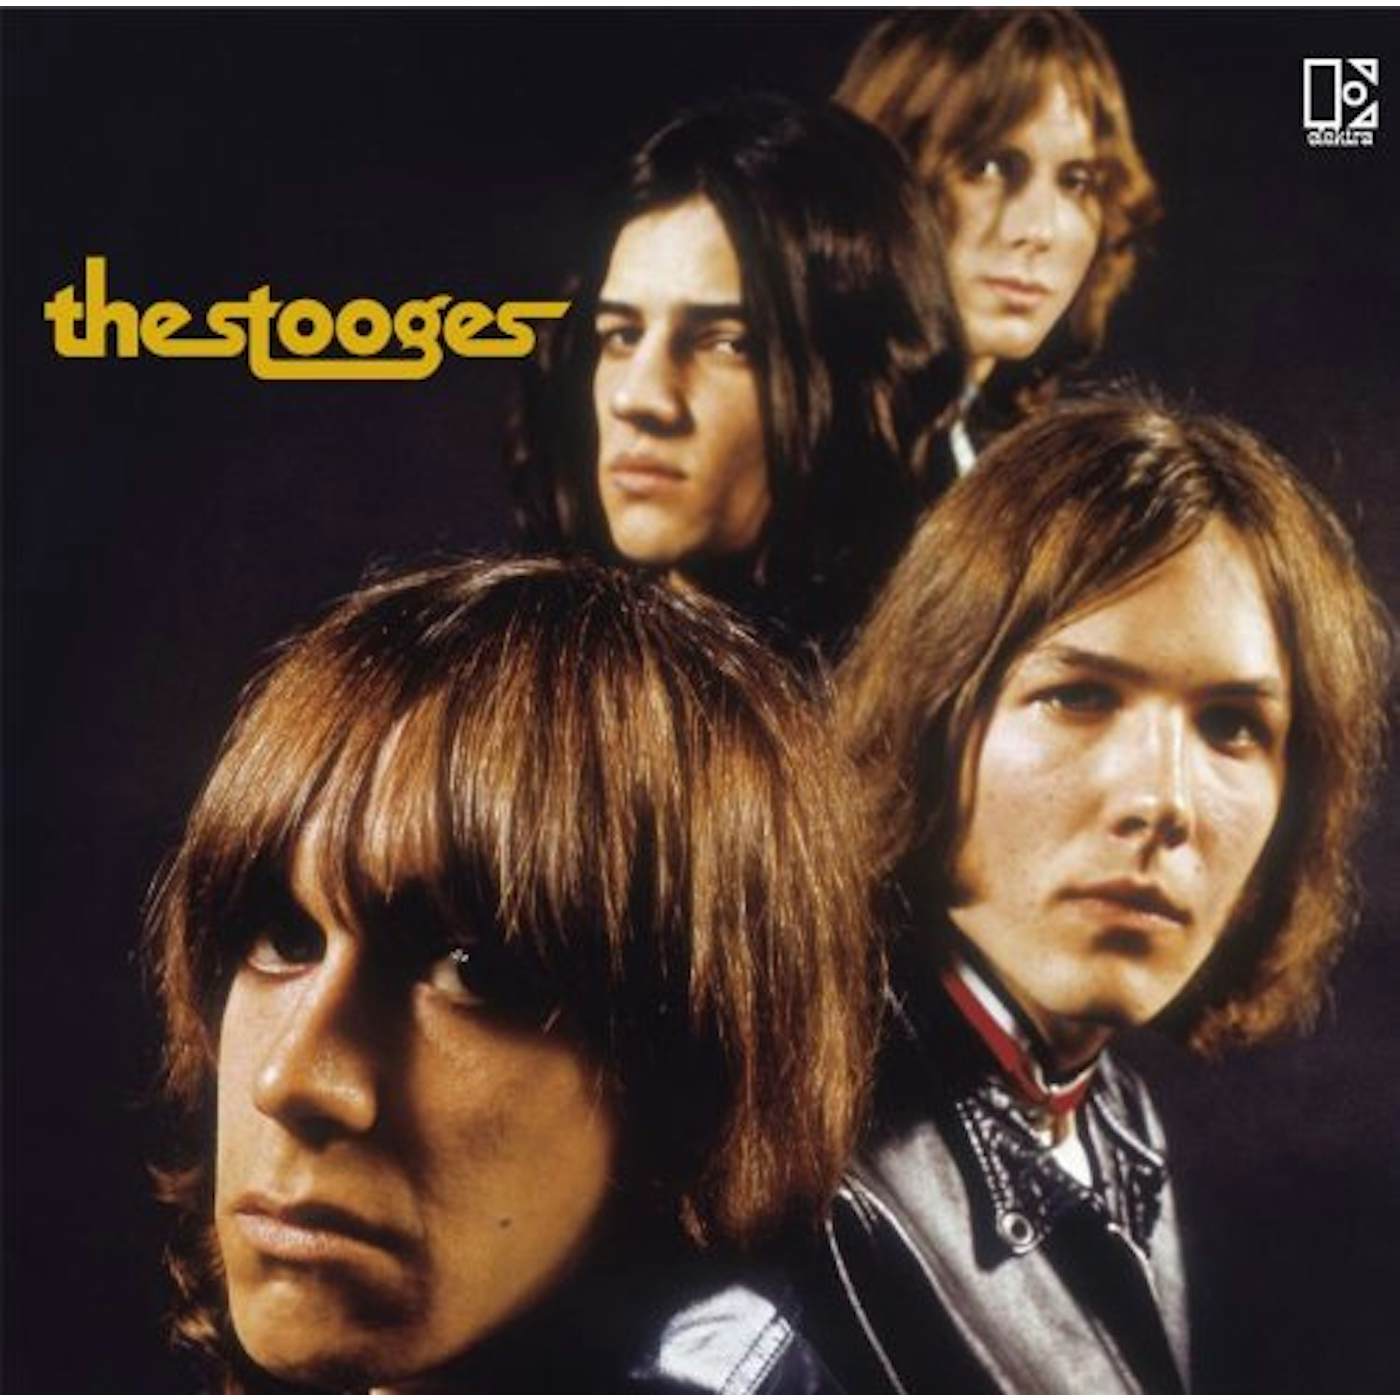 The Stooges Vinyl Record